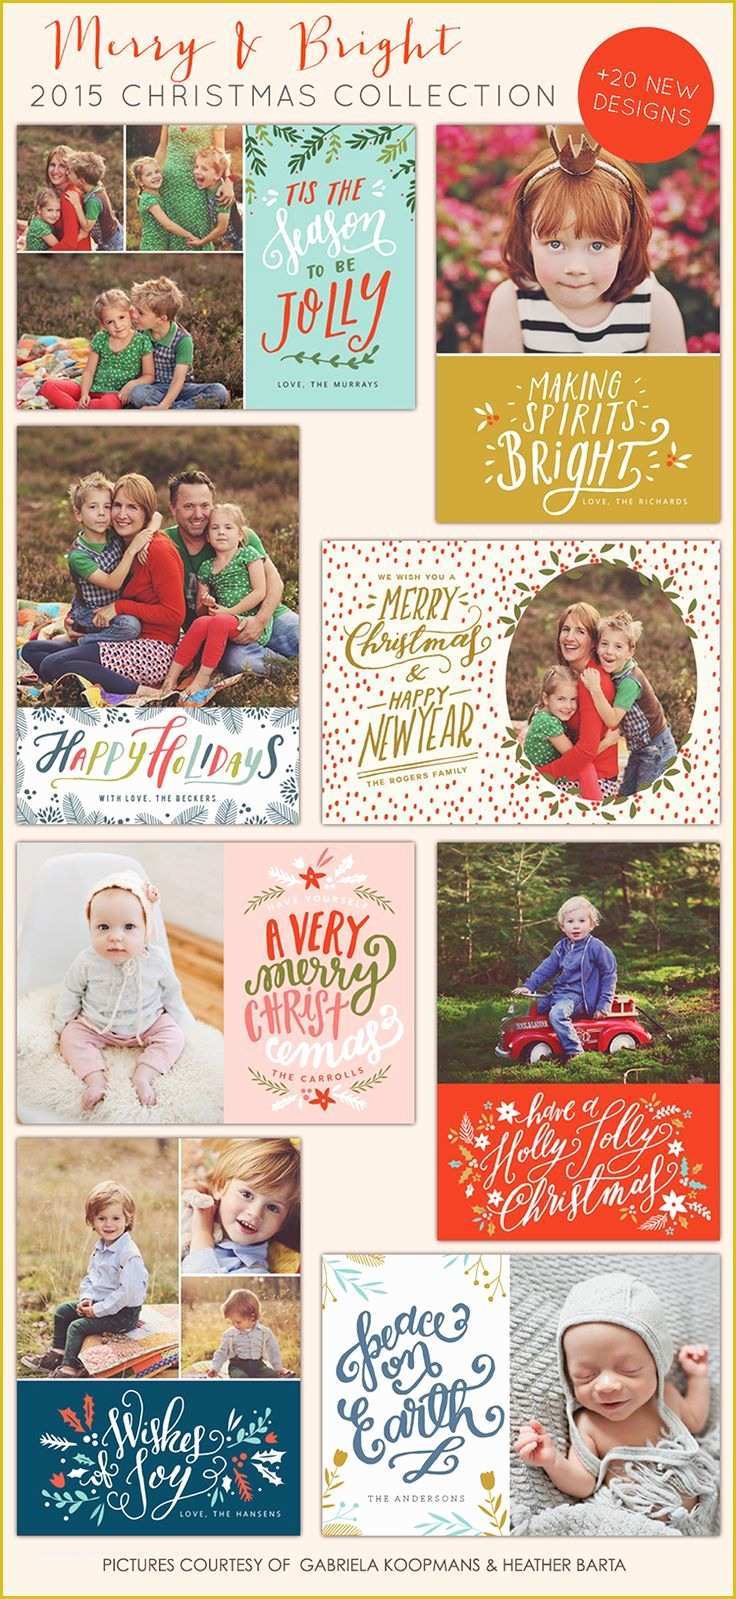 Free Christmas Card Templates for Photographers Of Best 25 Christmas Card Templates Ideas On Pinterest